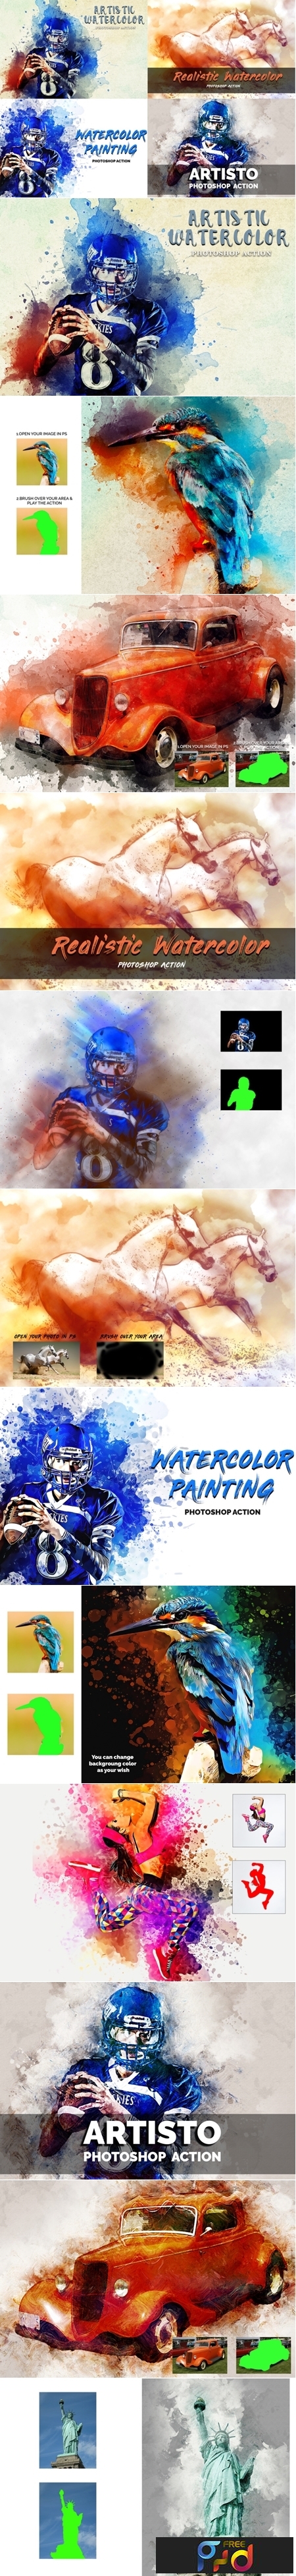 4 in 1 Watercolor Pack Photoshop Actions 3546201 1